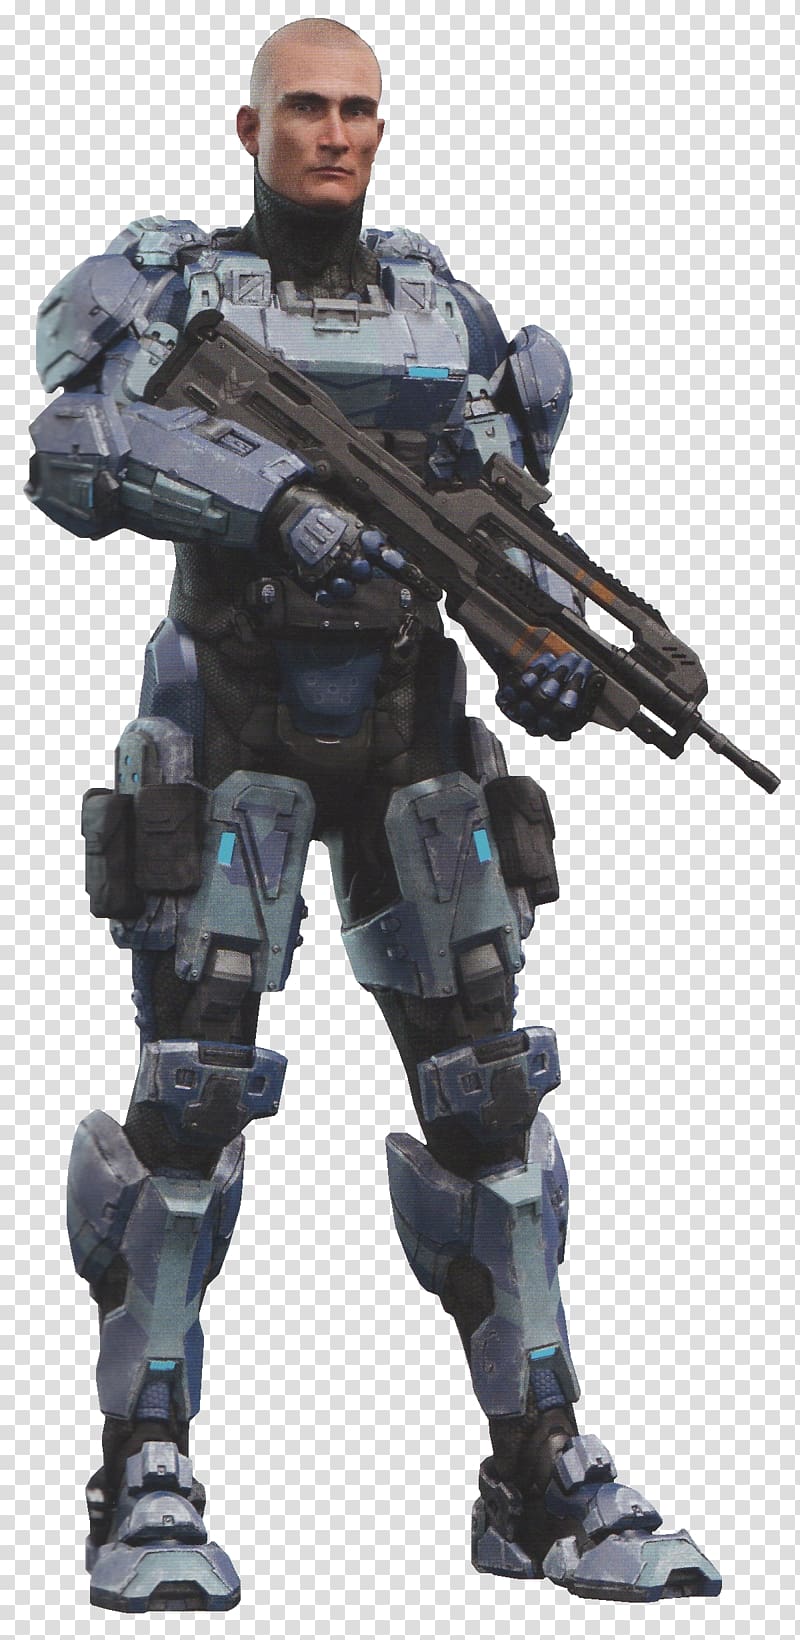 Halo 4 Halo: Spartan Assault Master Chief Halo 5: Guardians Halo 3, halo transparent background PNG clipart